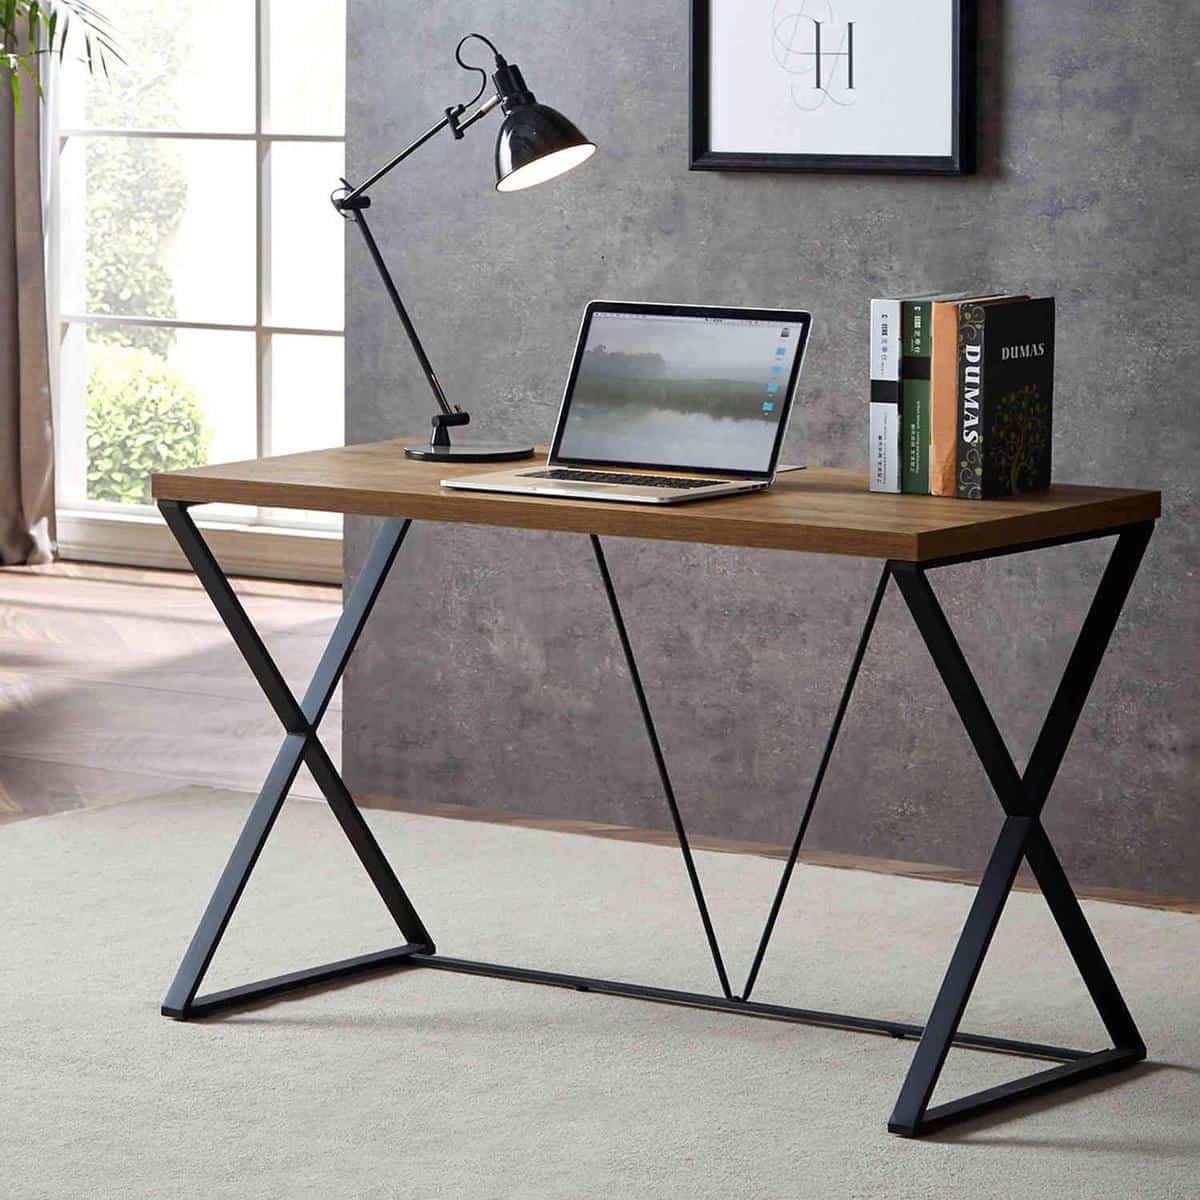 The Industrial-Themed Computer Desk with a Glance of a Rustic Element